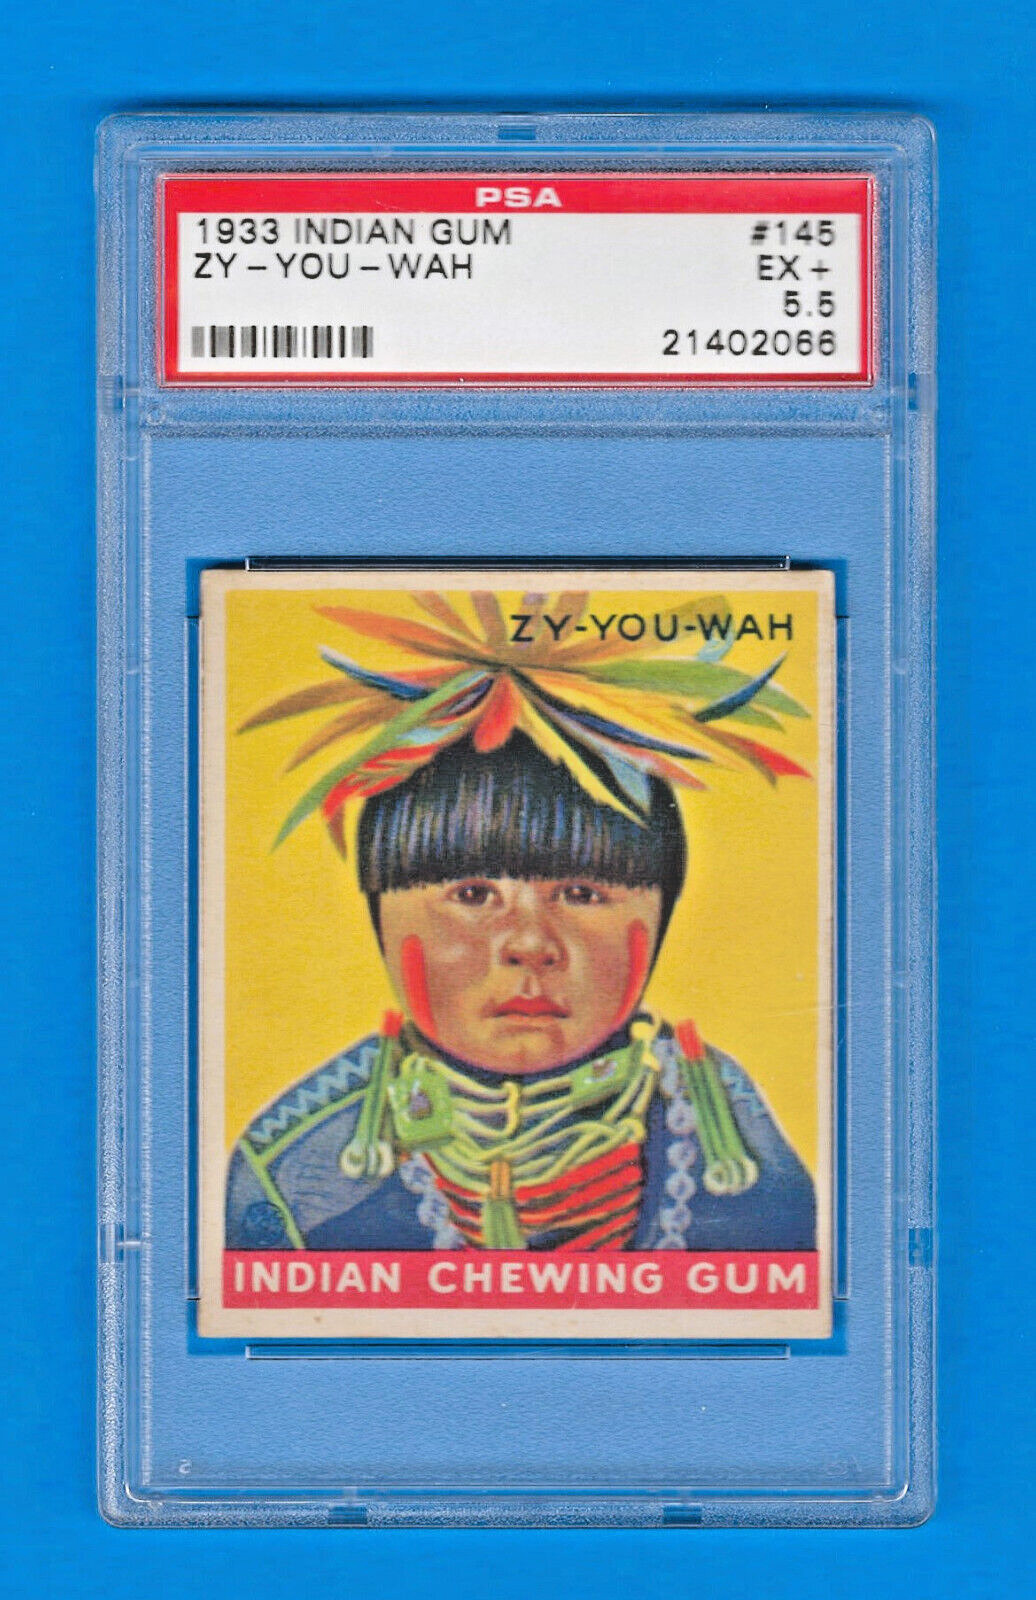 1933 R73 Goudey Indian Gum Card  #145 - ZY-YOU-WAH - Series 216 - PSA 5.5 - EX+